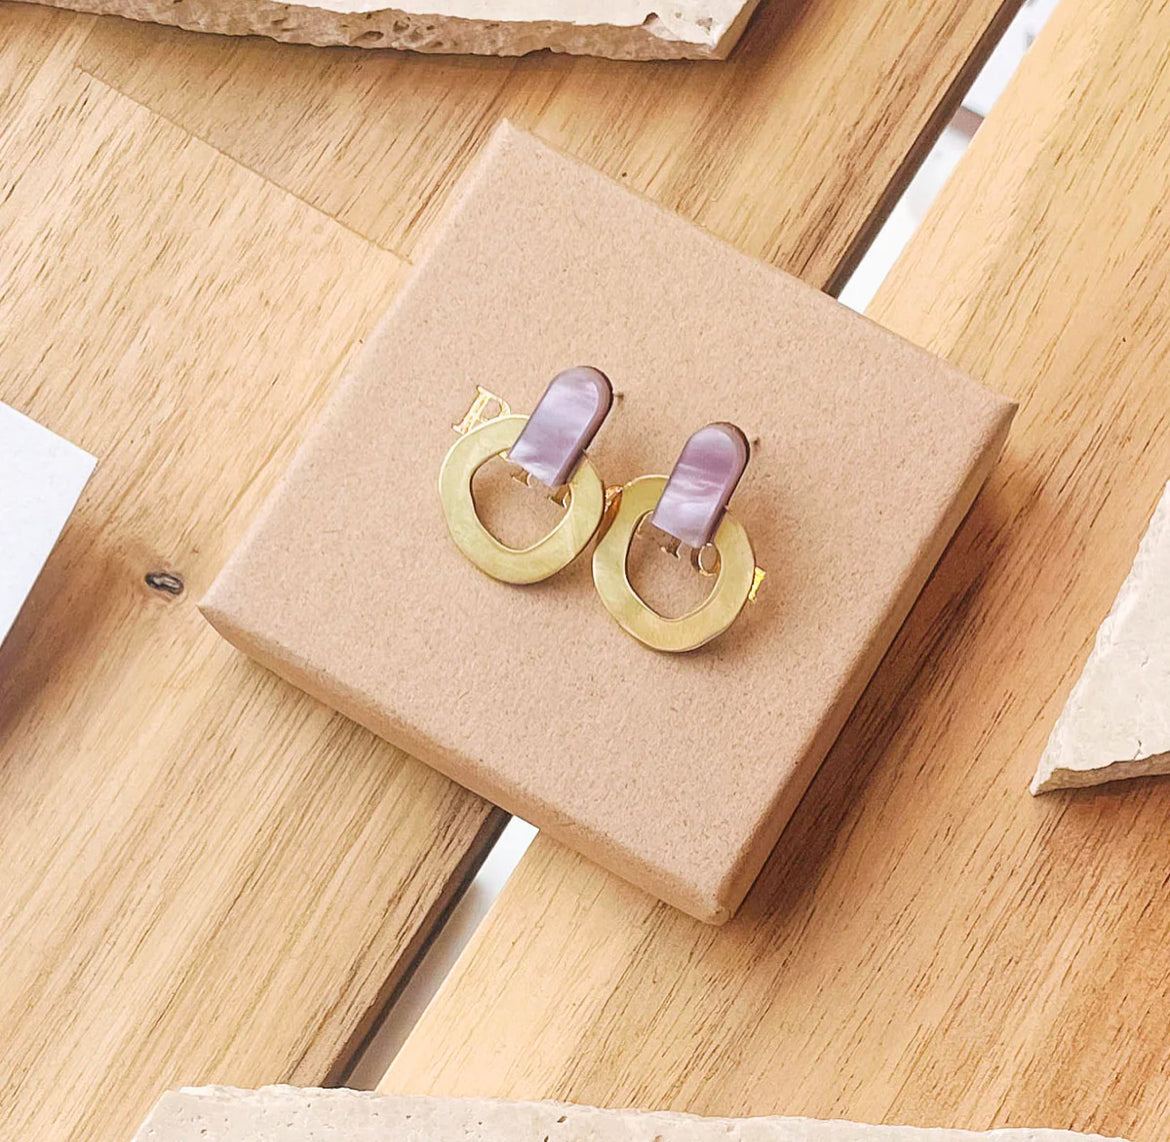 Around Brass Stud Earrings in Lilac - The Bristol Artisan Handmade Sustainable Gifts and Homewares.